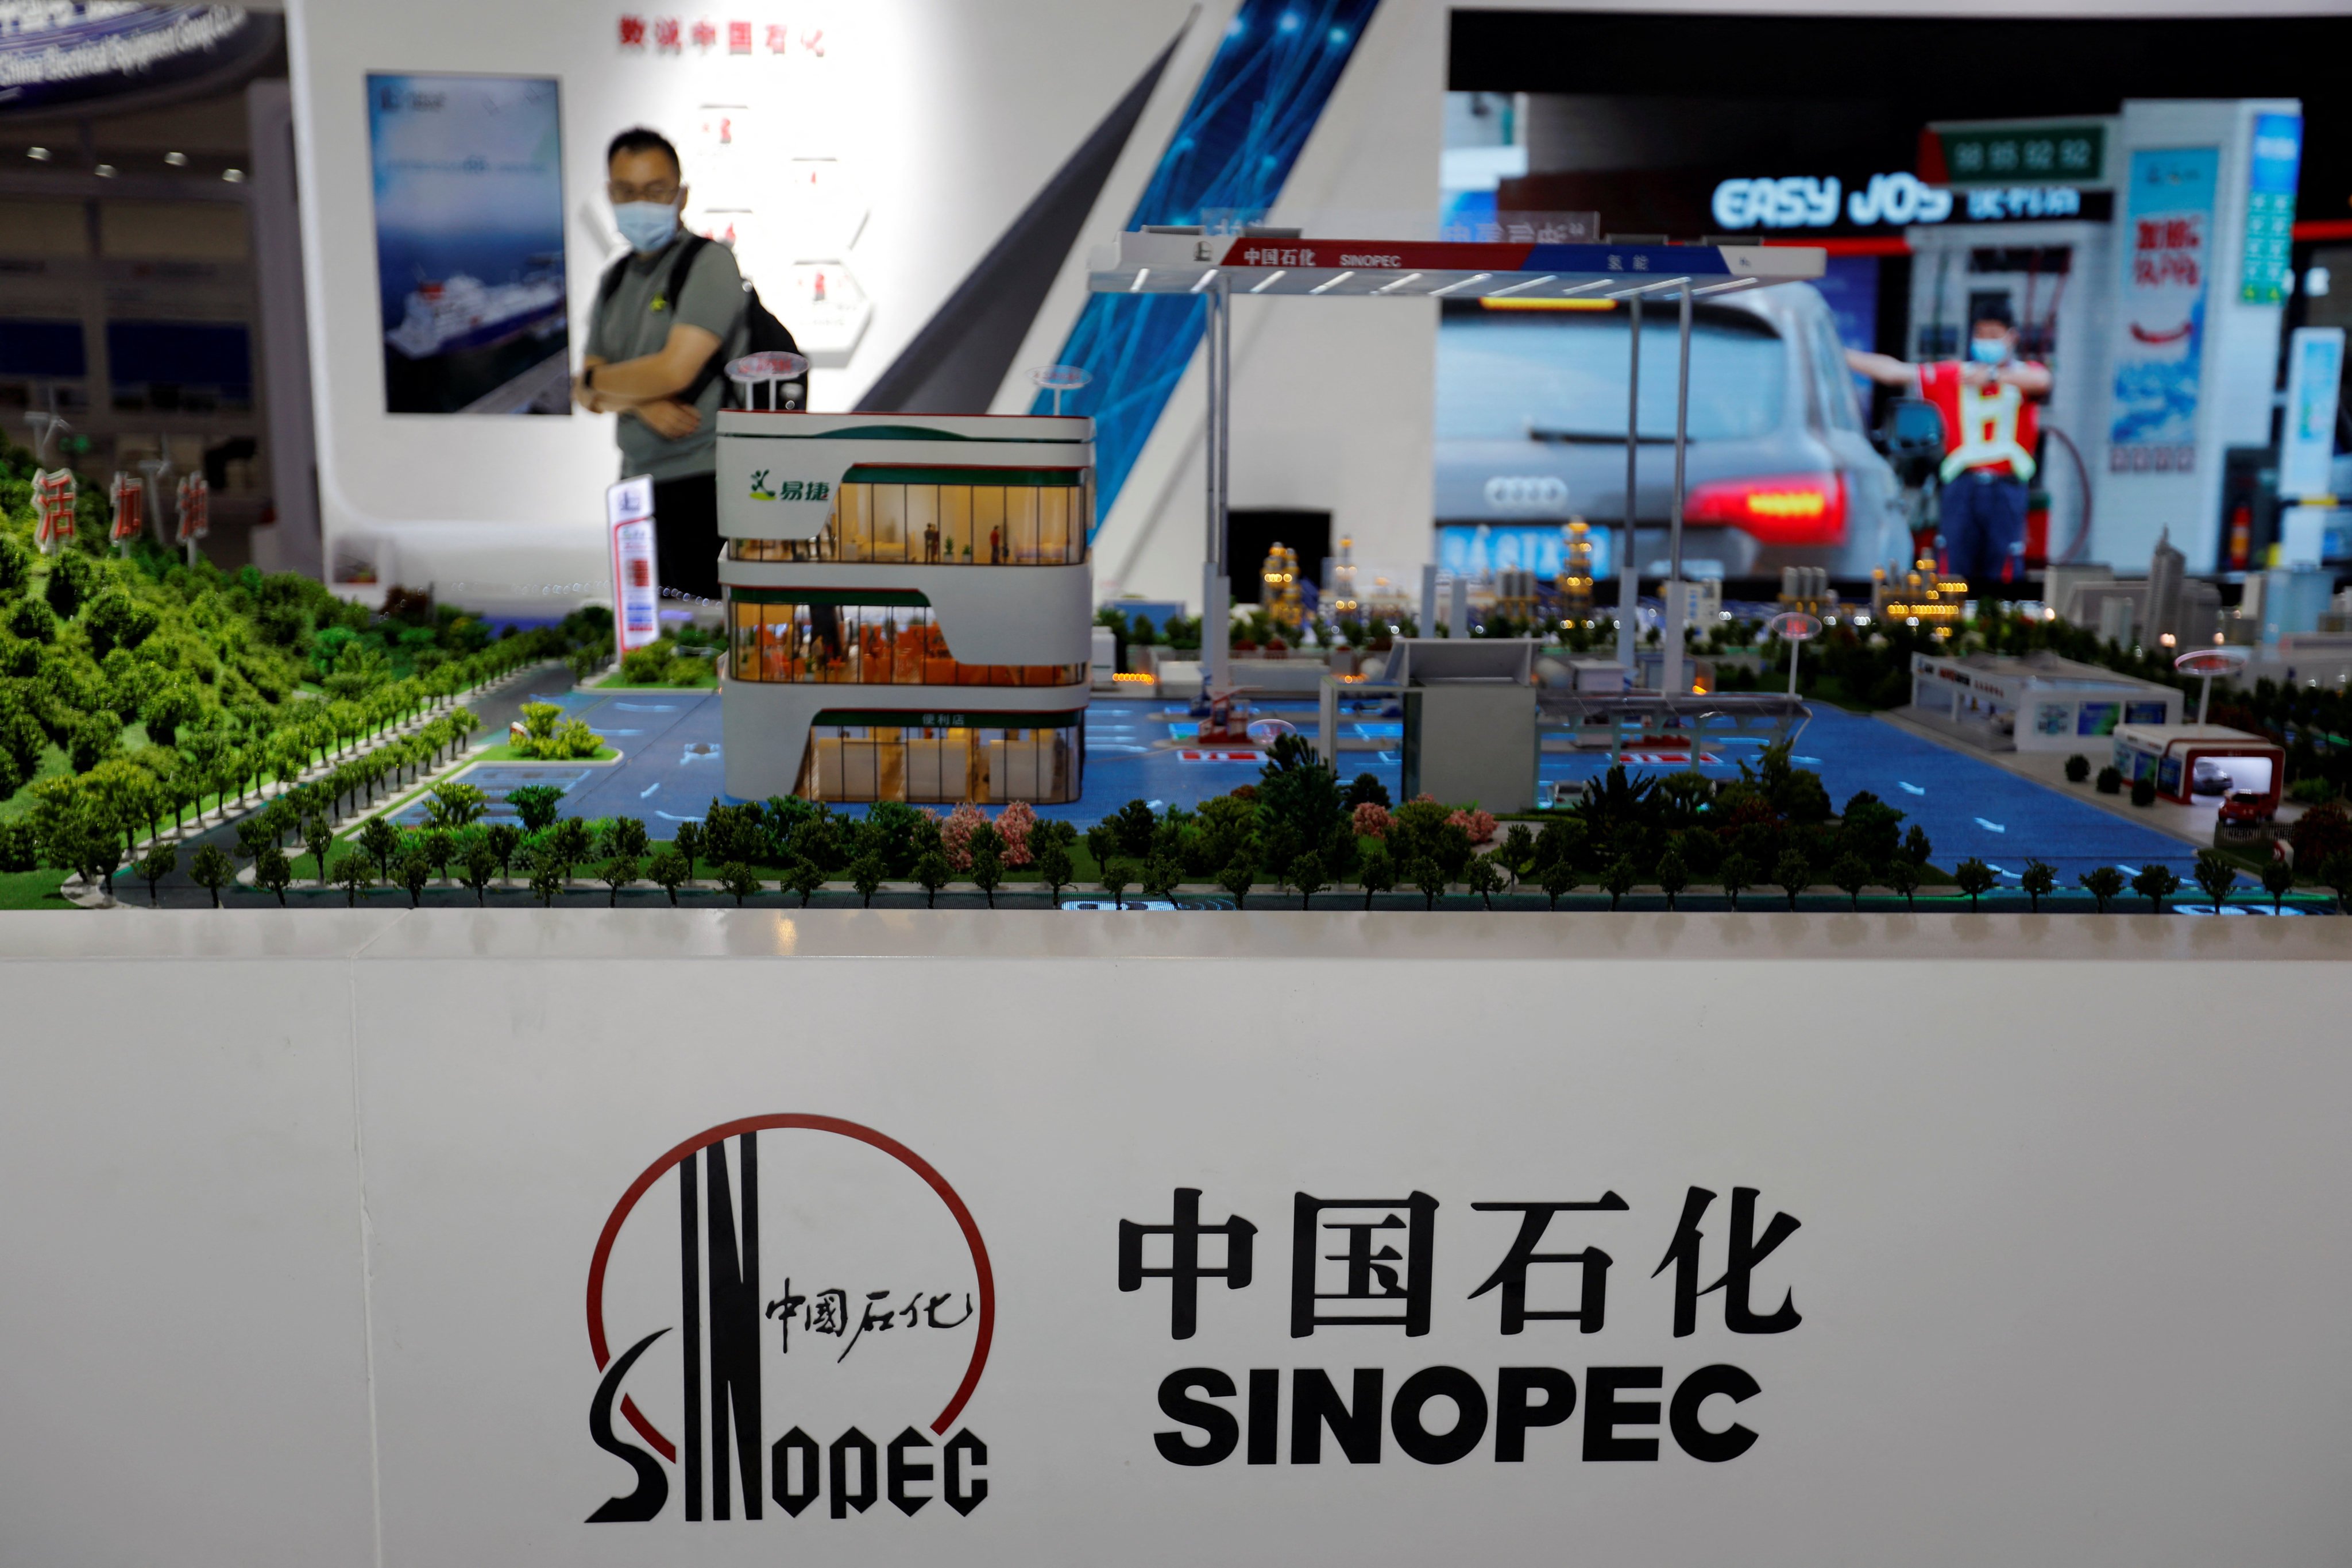 Models displayed at the booth of Chinese oil company Sinopec during the China International Fair for Trade in Services (CIFTIS) in Beijing on September 1, 2022. Photo: Reuters